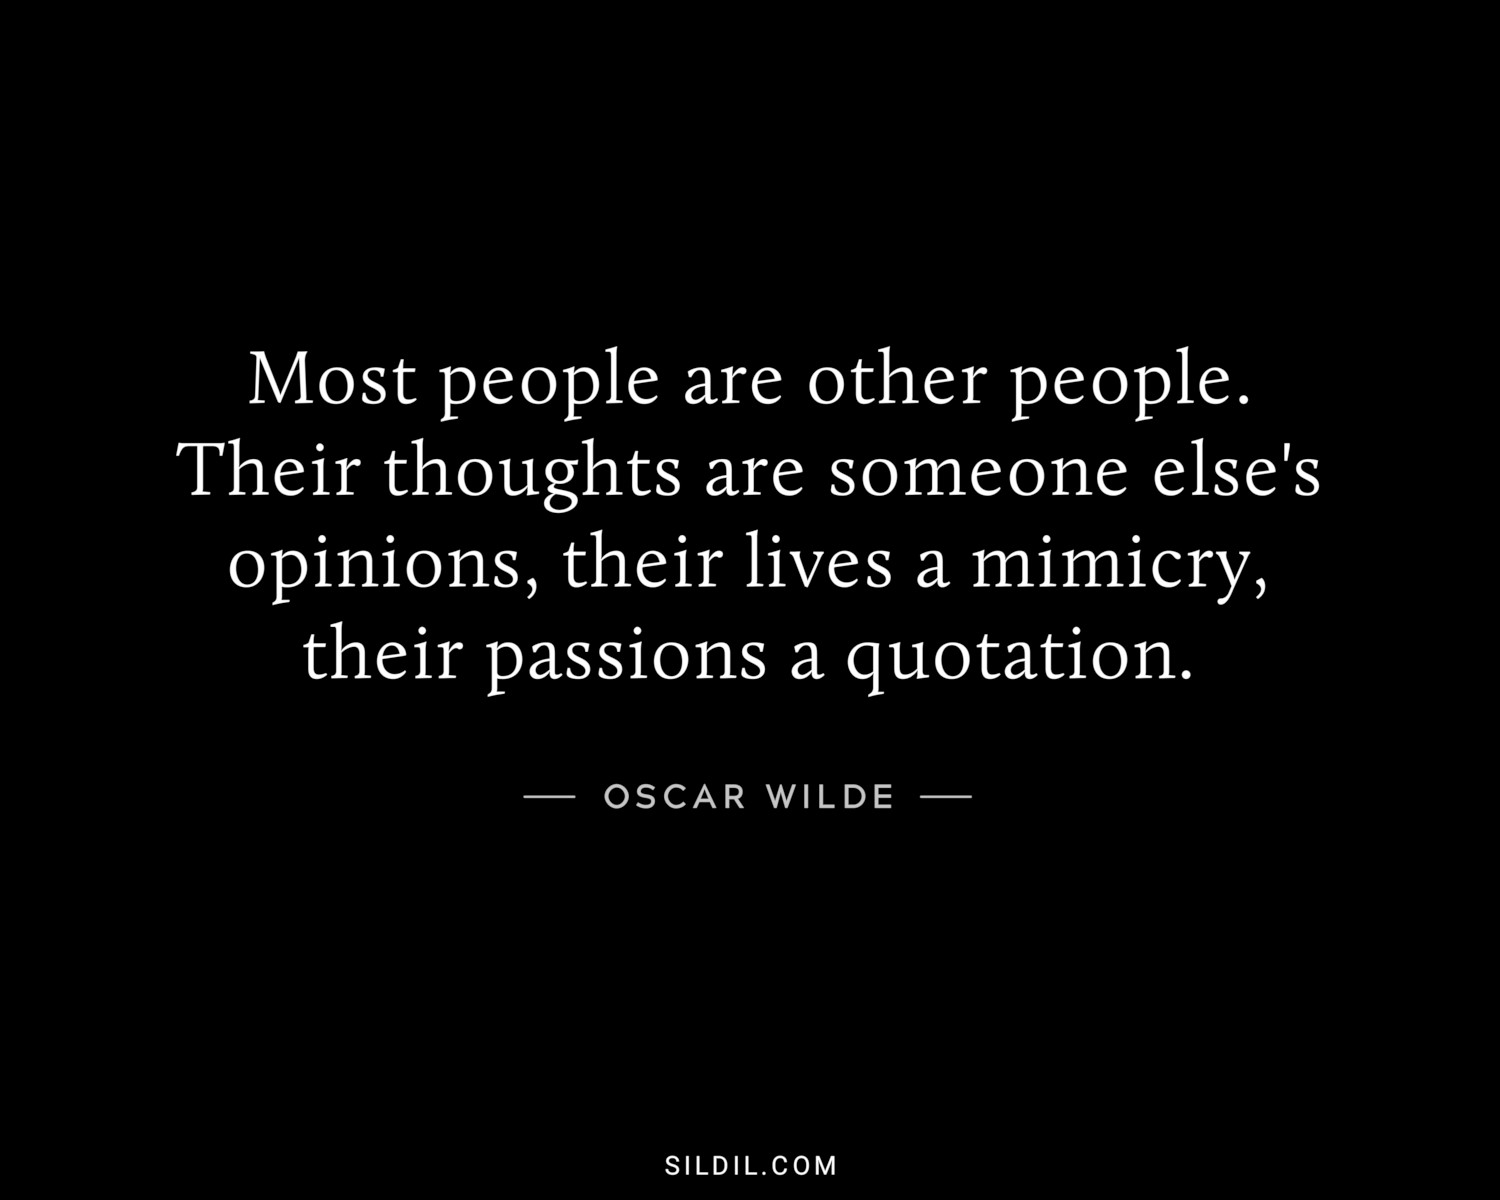 Most people are other people. Their thoughts are someone else's opinions, their lives a mimicry, their passions a quotation.